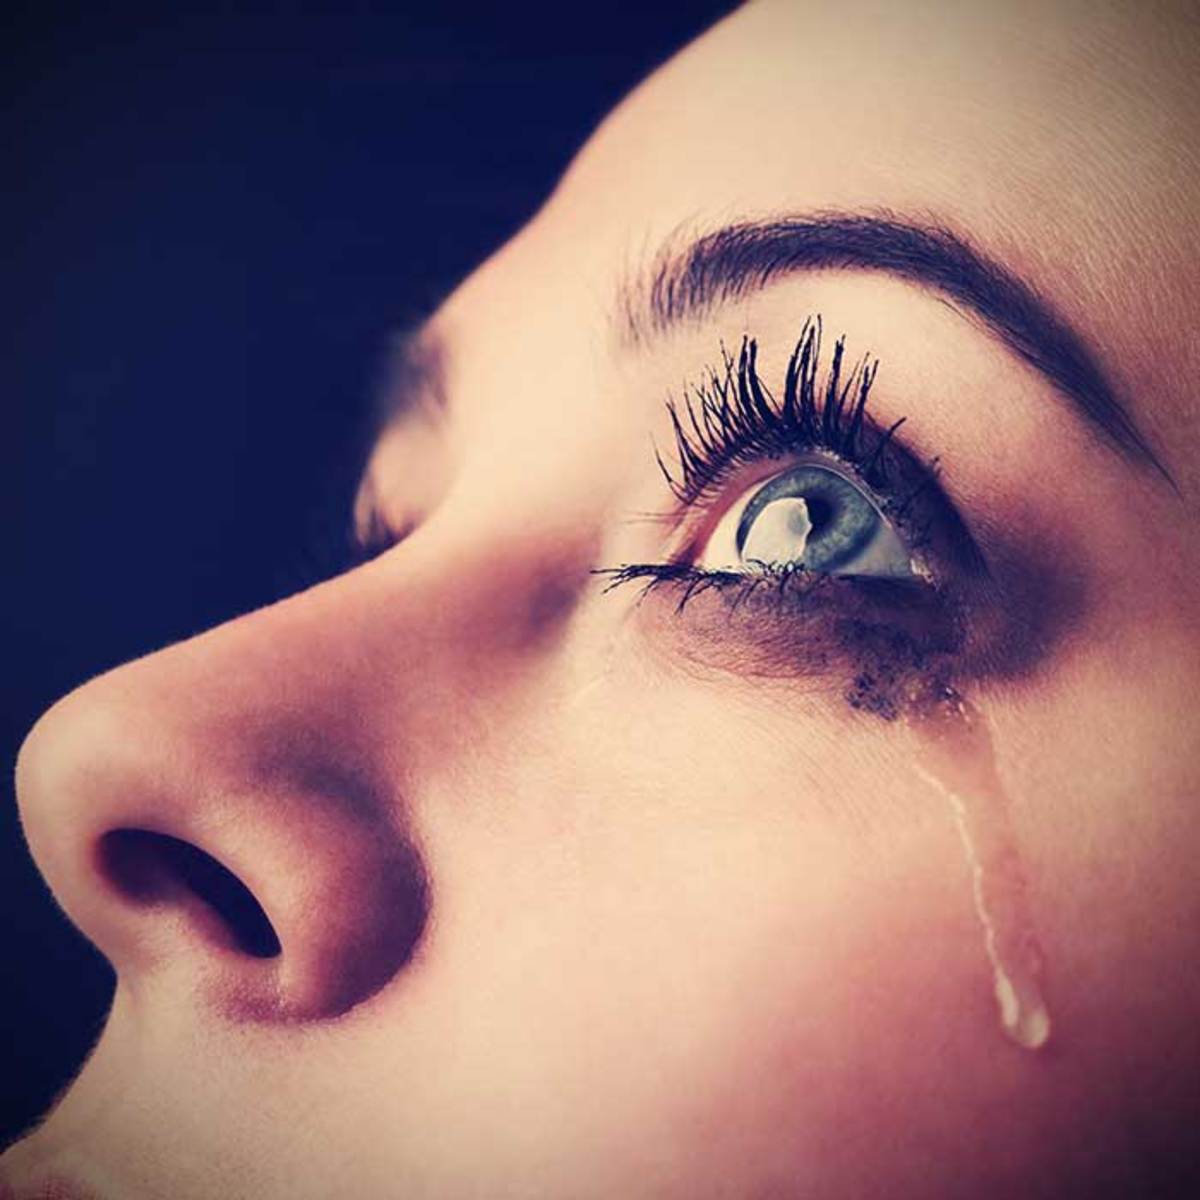 10 Signs of Depression in Women